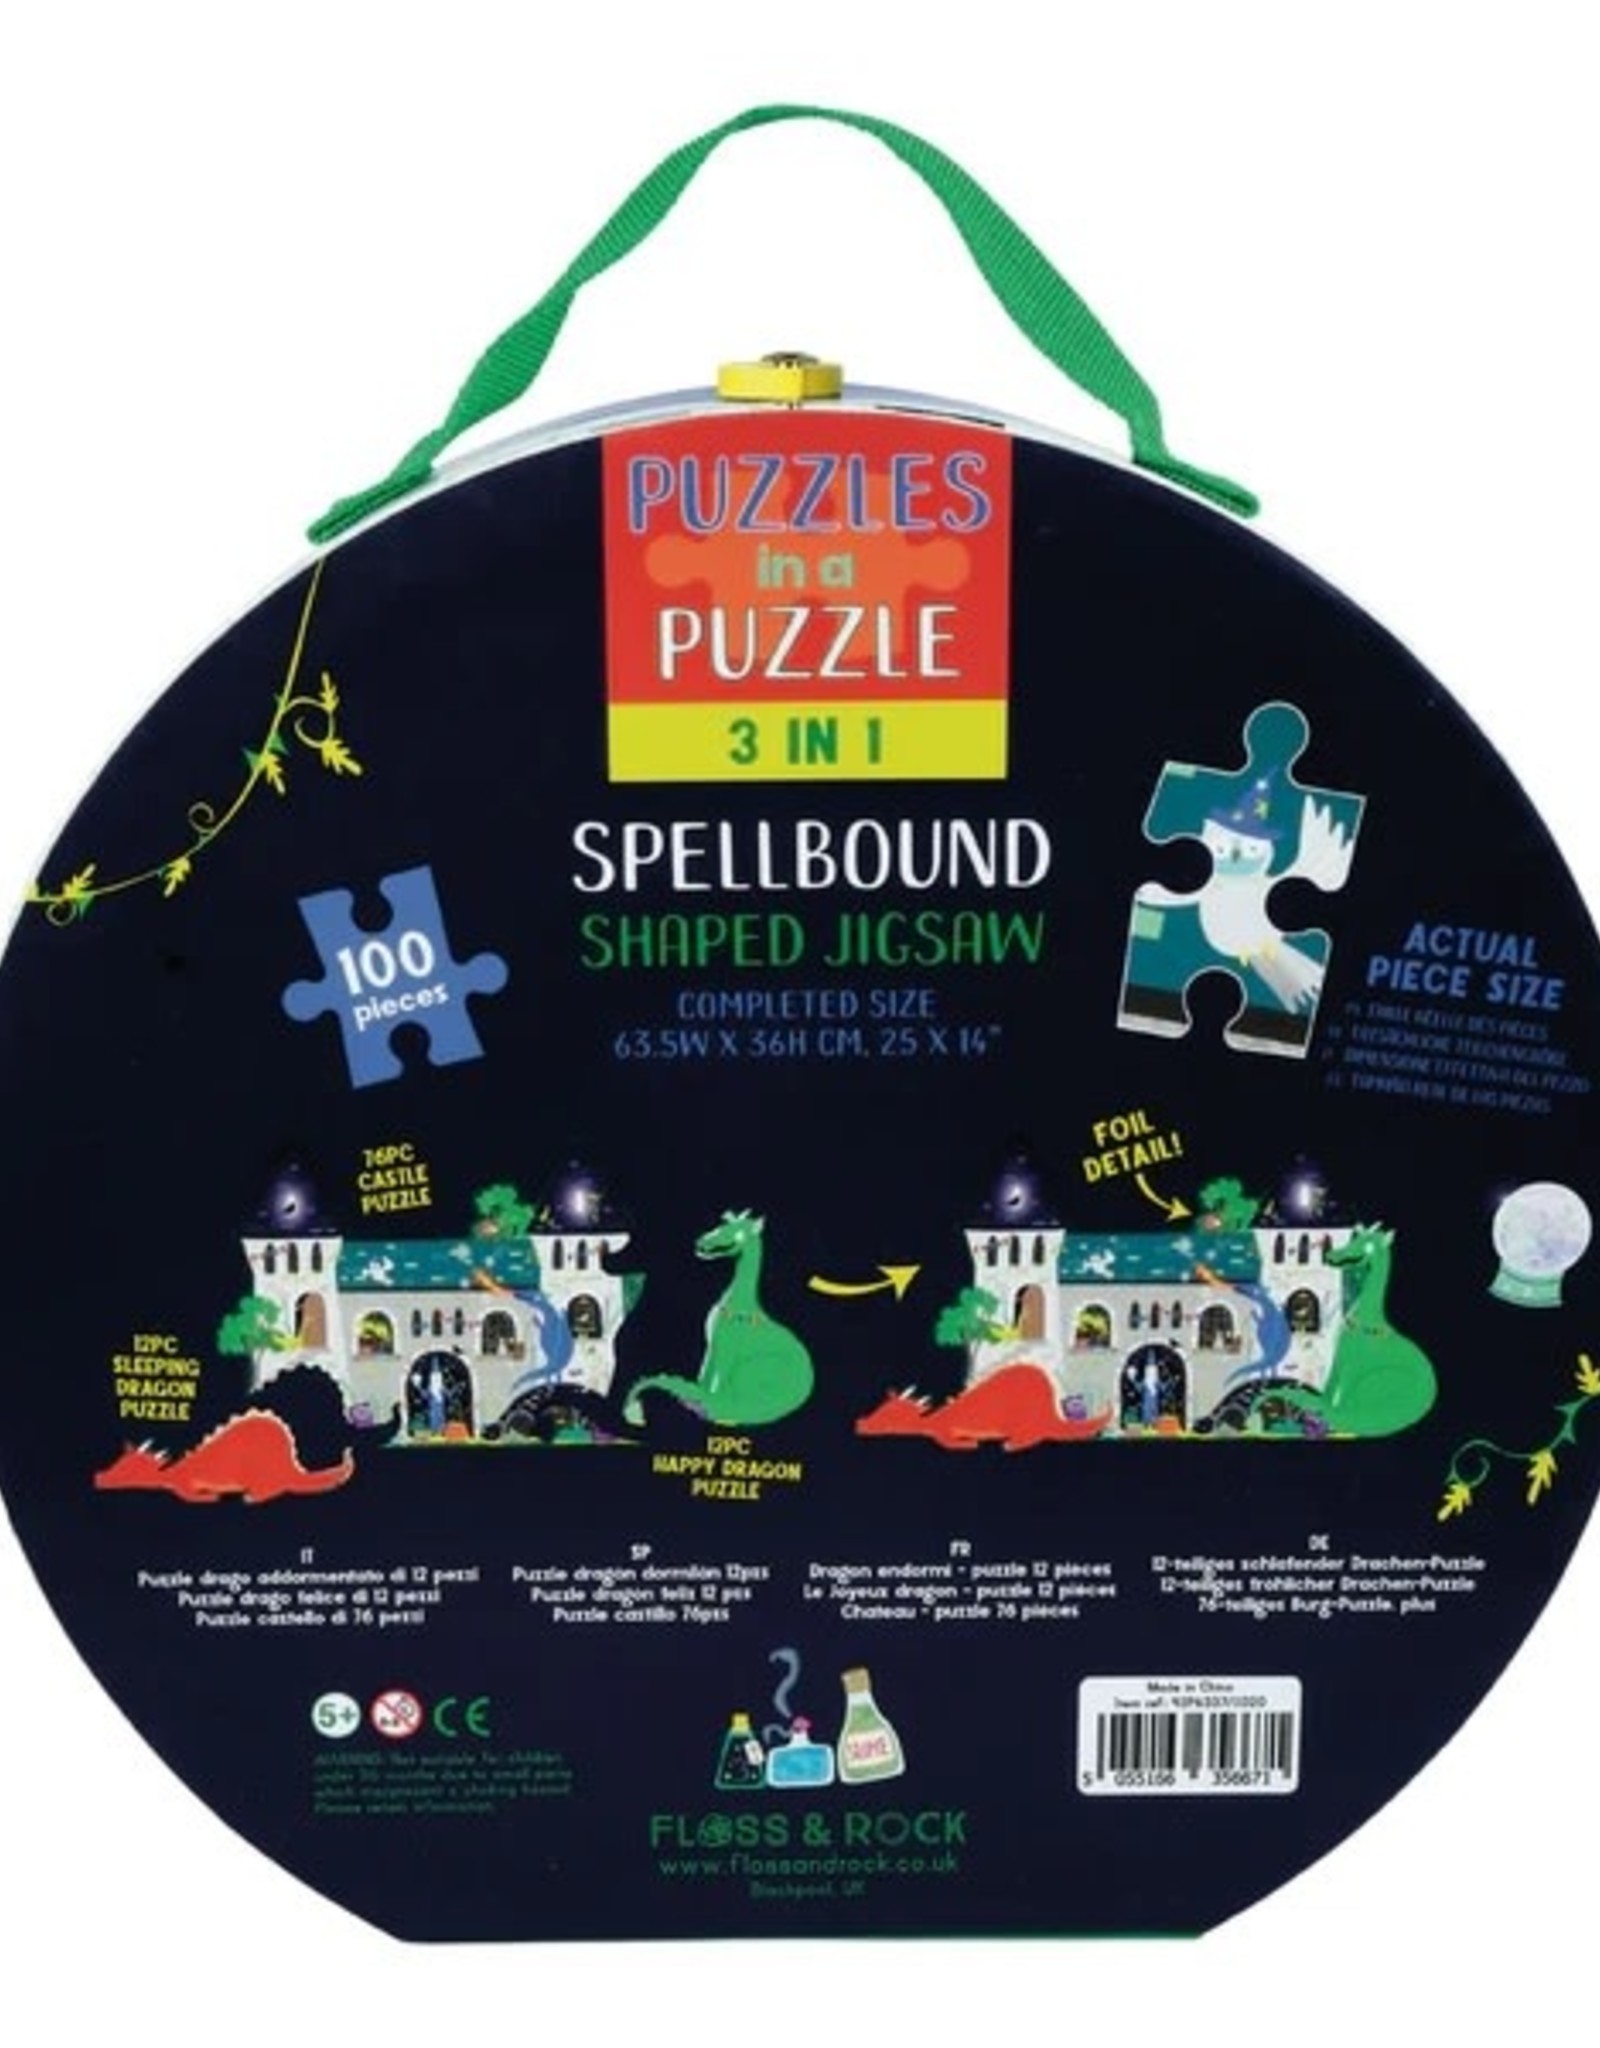 Floss & Rock SPELLBOUND 100PC 3 IN 1 PUZZLE